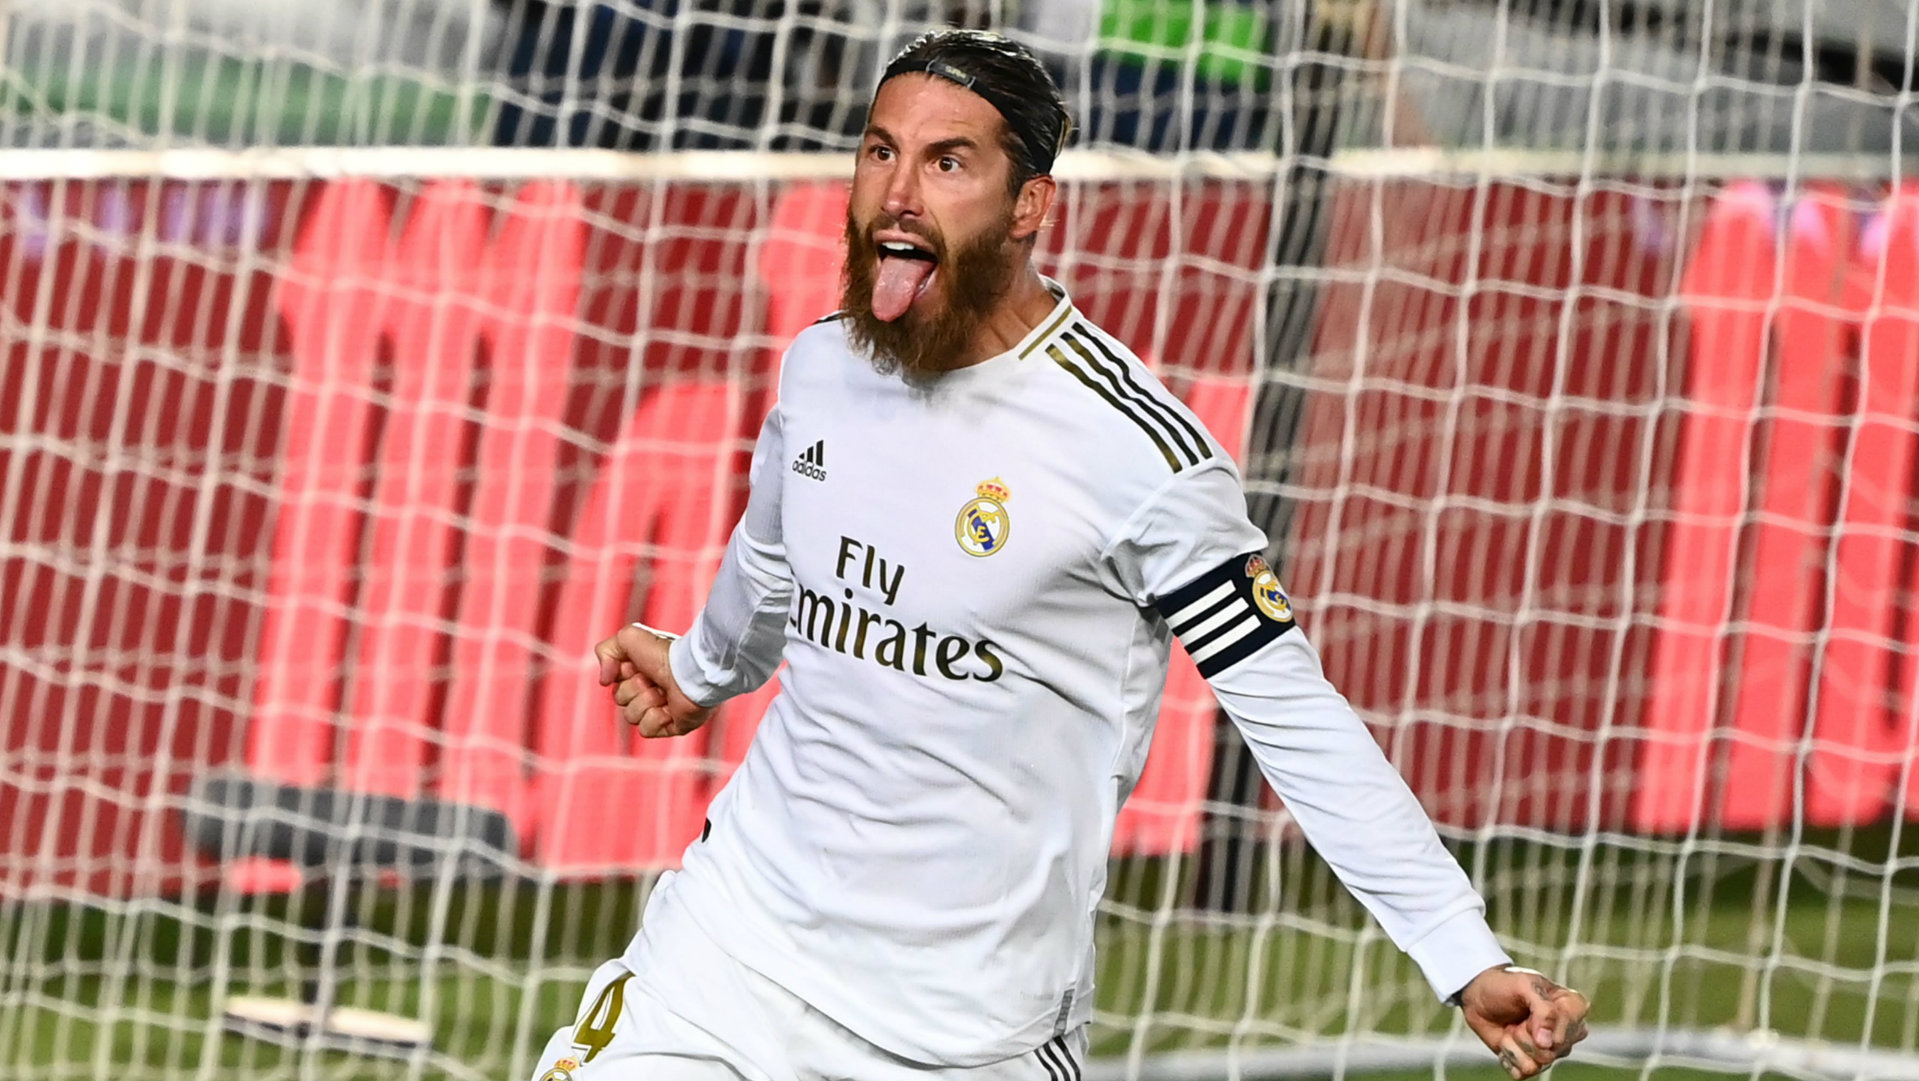 Ramos will surely end his career in Madrid - Perez | Goal.com